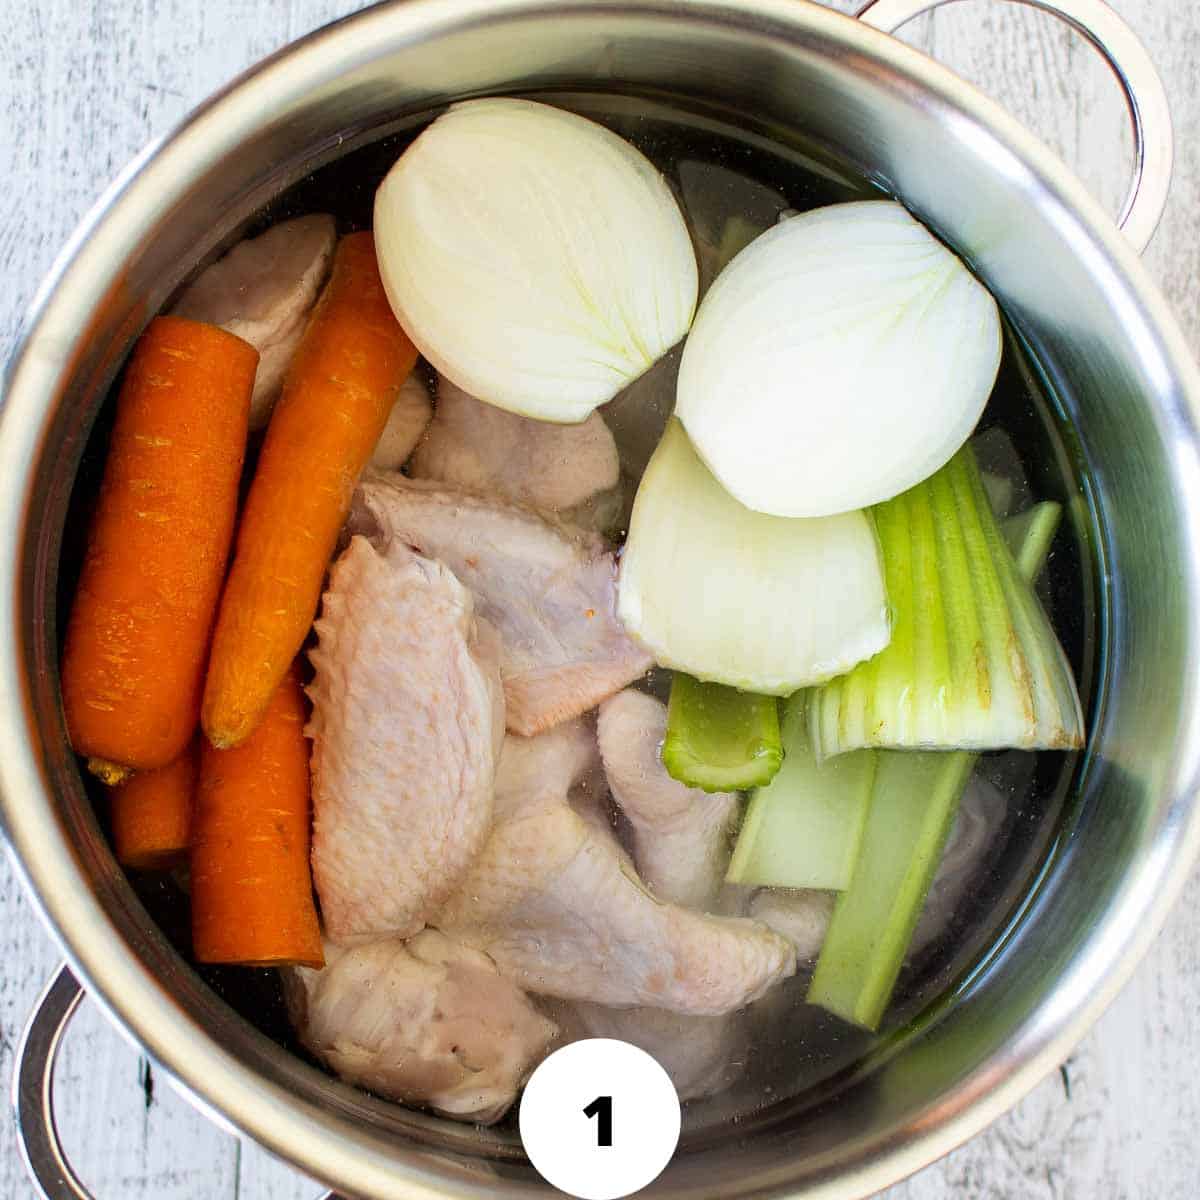 Chicken, carrot, celery and onion in a pot and covered with water.